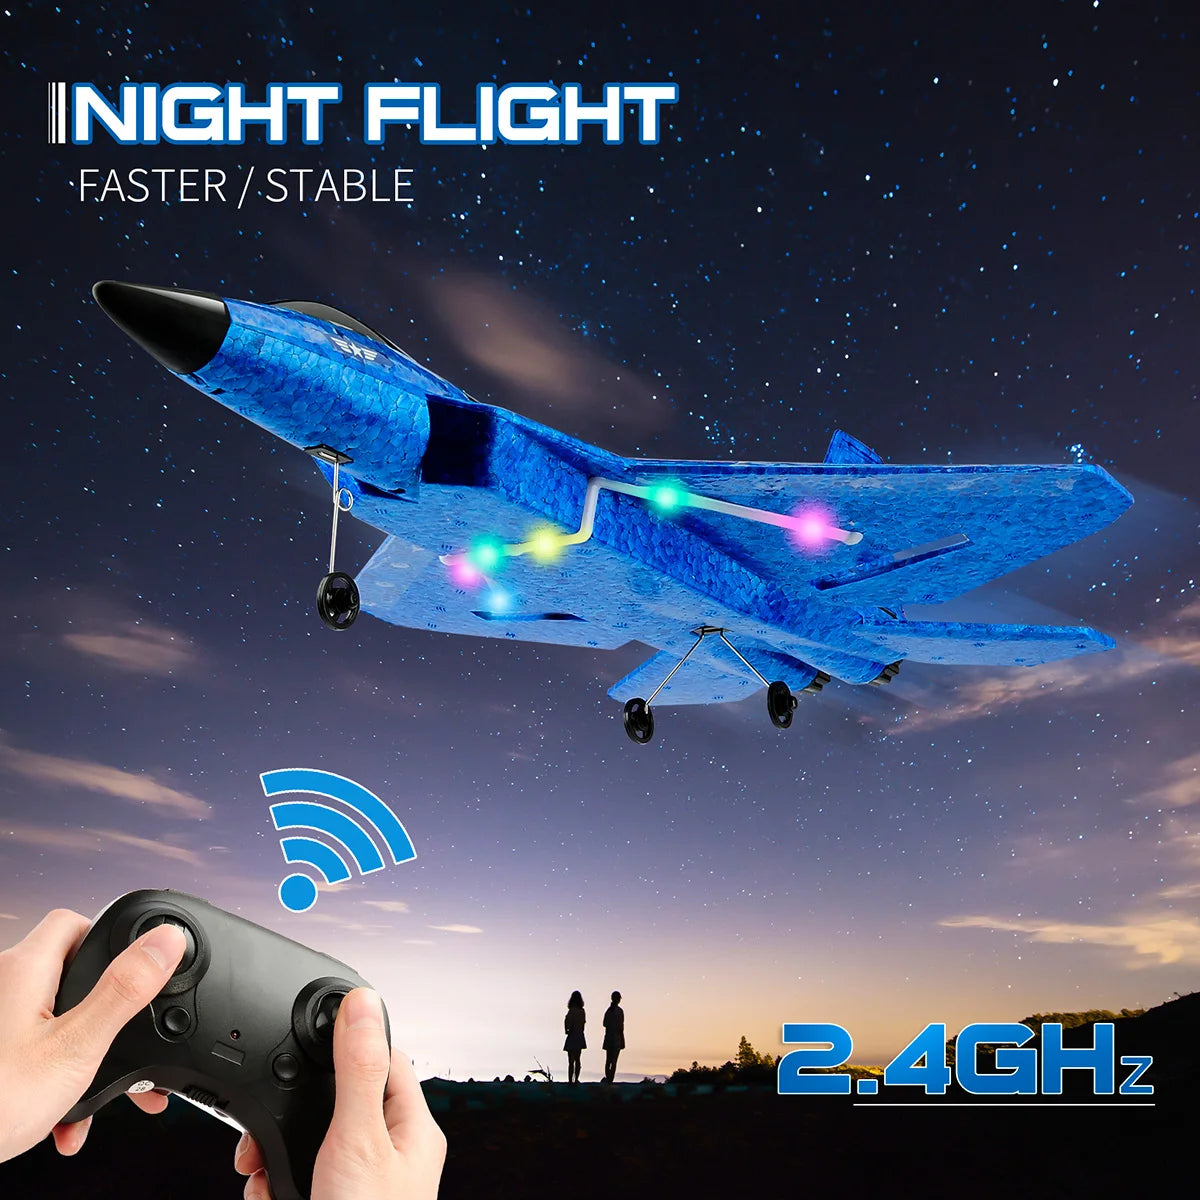 SU-27 RC Plane, INIGHT FLIGHT FASTER / STABLE Z-AGHH